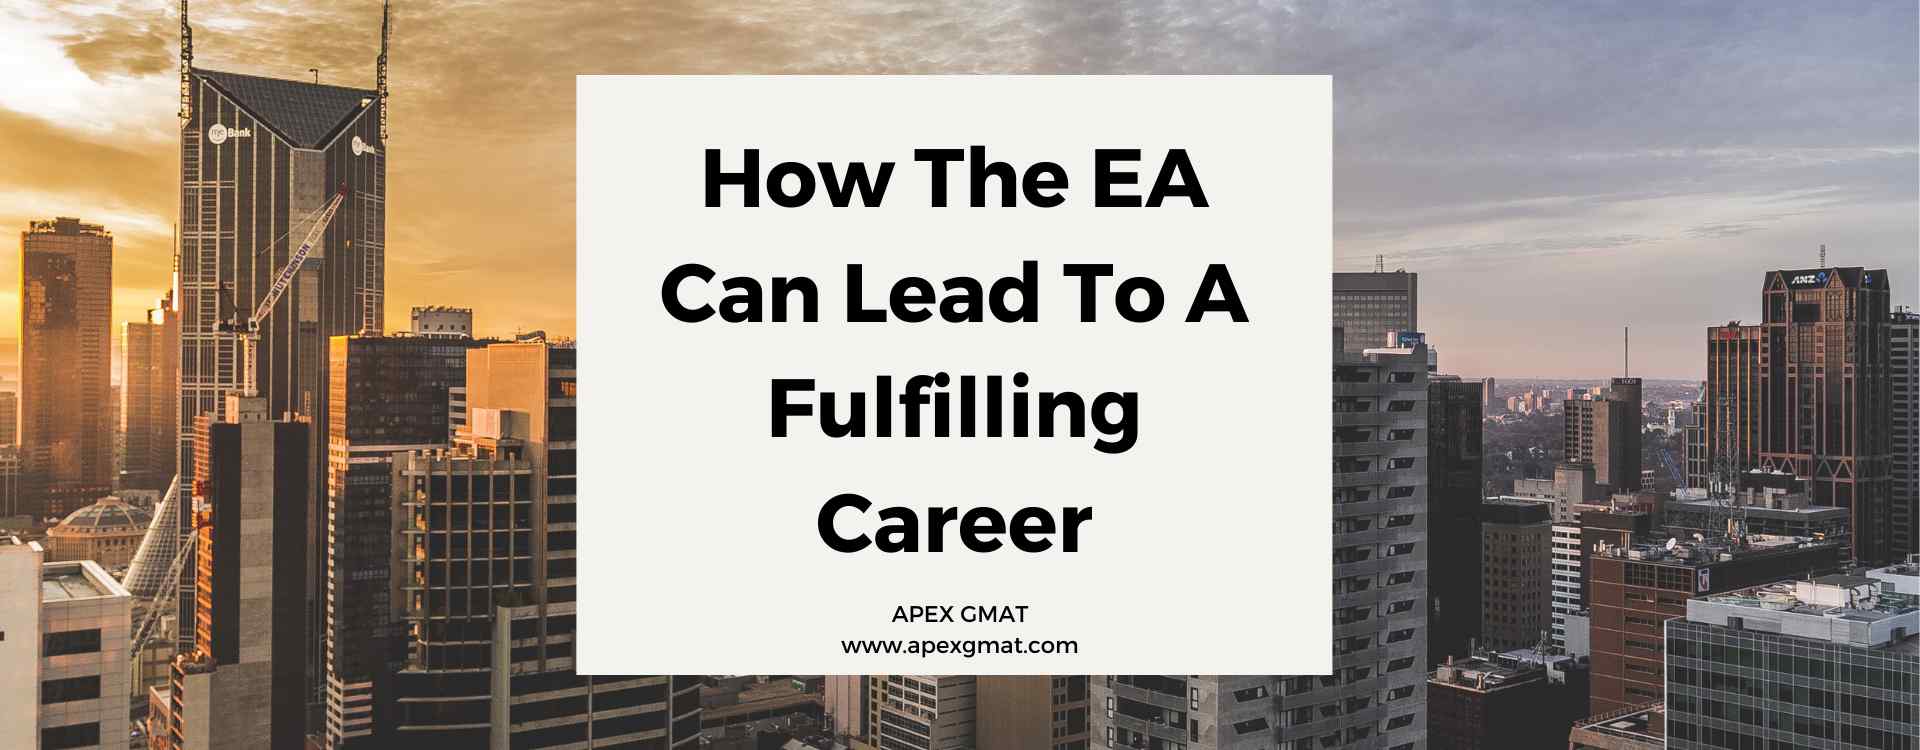 How The EA Can Lead To A Fulfilling Career